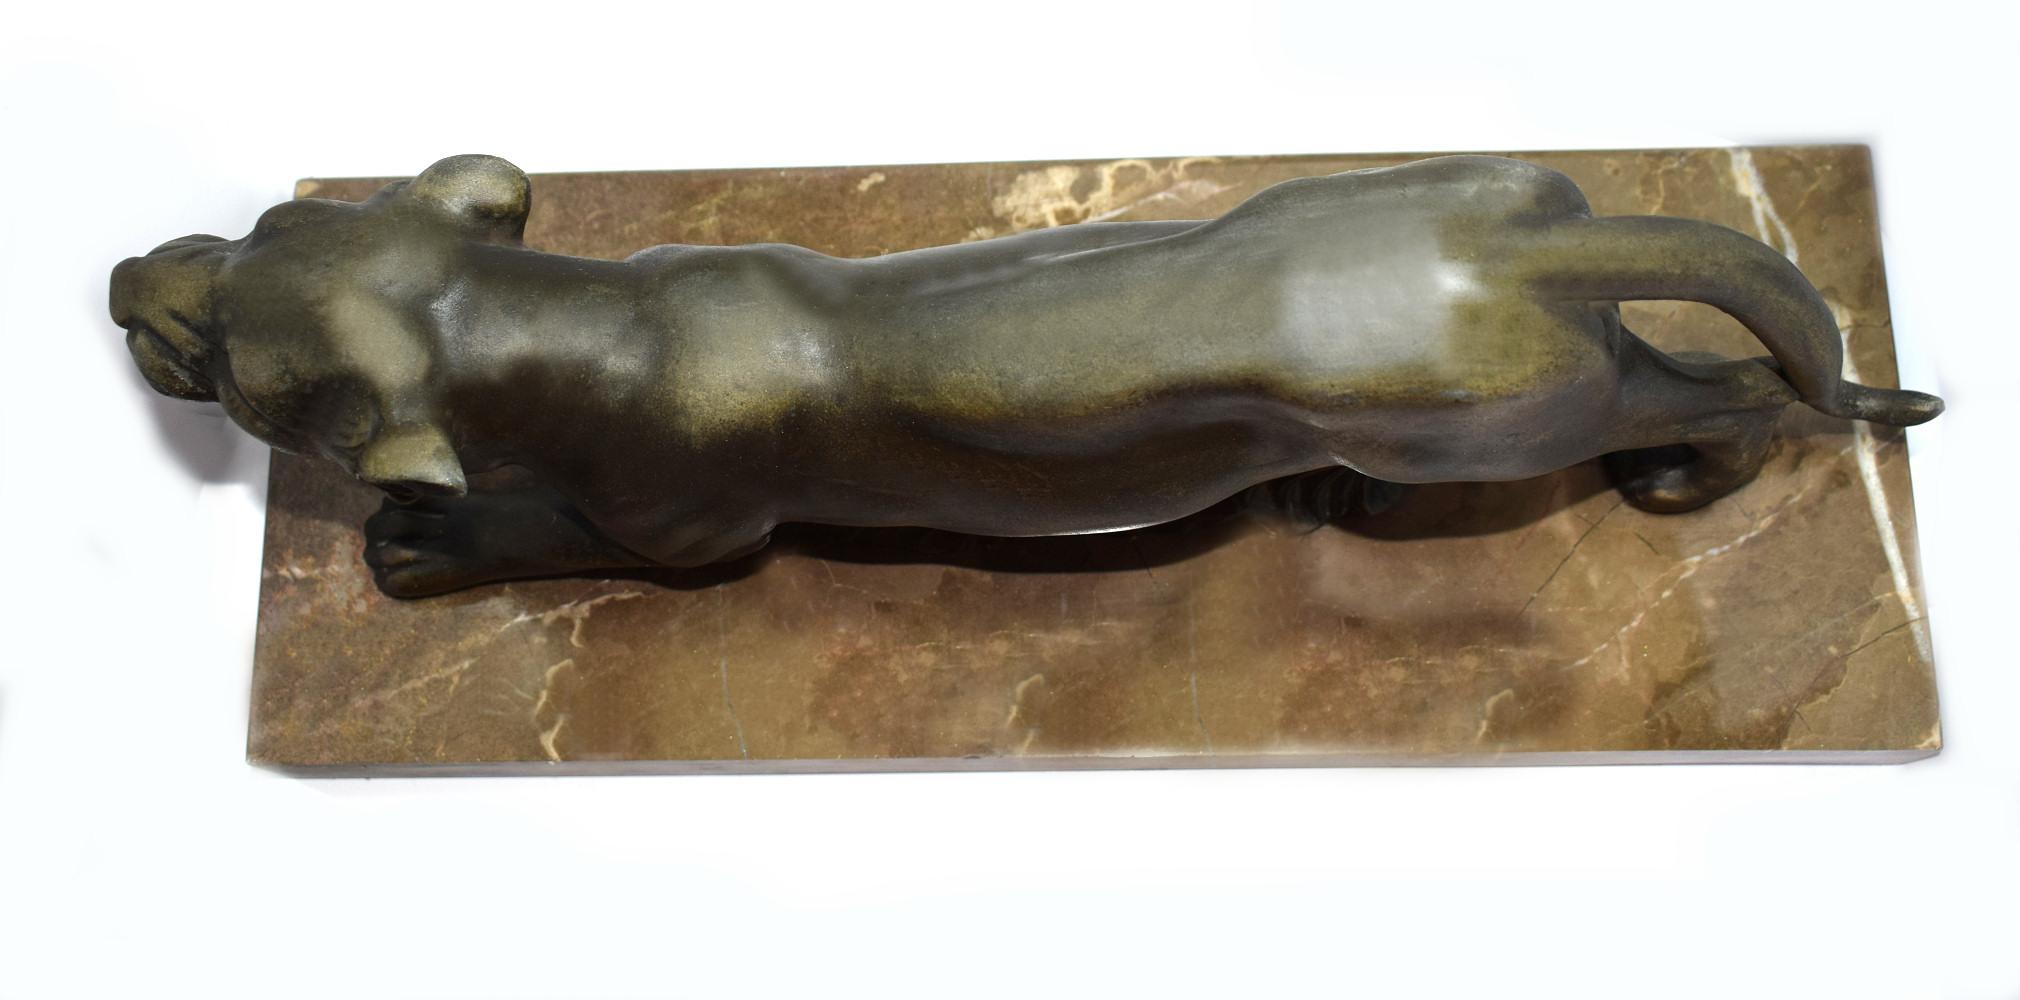 For your consideration is this very well sculptured Art Deco prowling panther sculpture which sits on a marble base. The body of the panther is spelter and has a wonderful patinated copper effect with a mild Verdi Gris. Condition is very good with